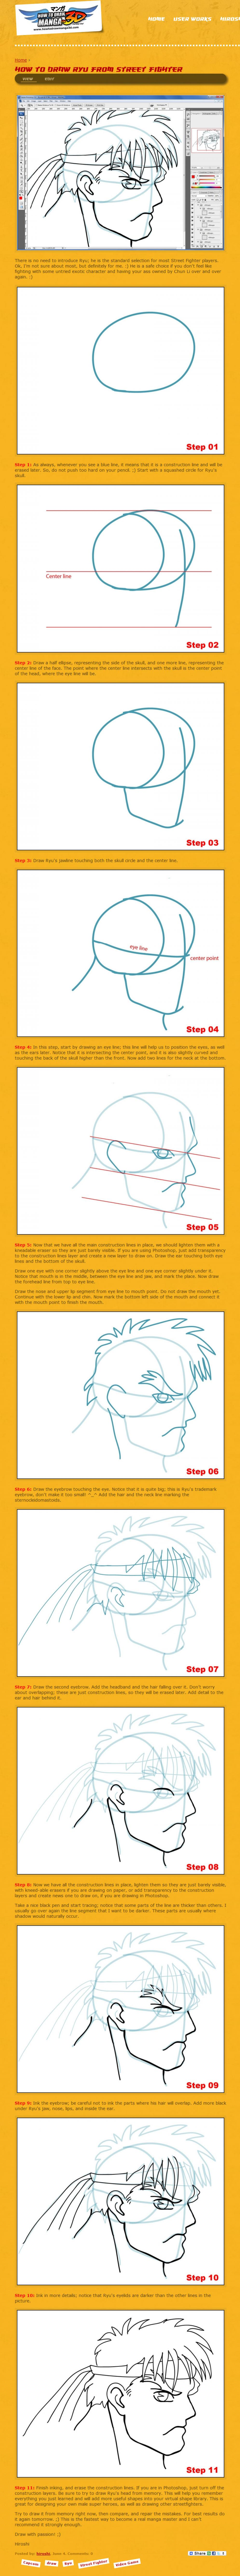 Image from Photo References - how_to_draw_ryu_from_sf_2.jpg